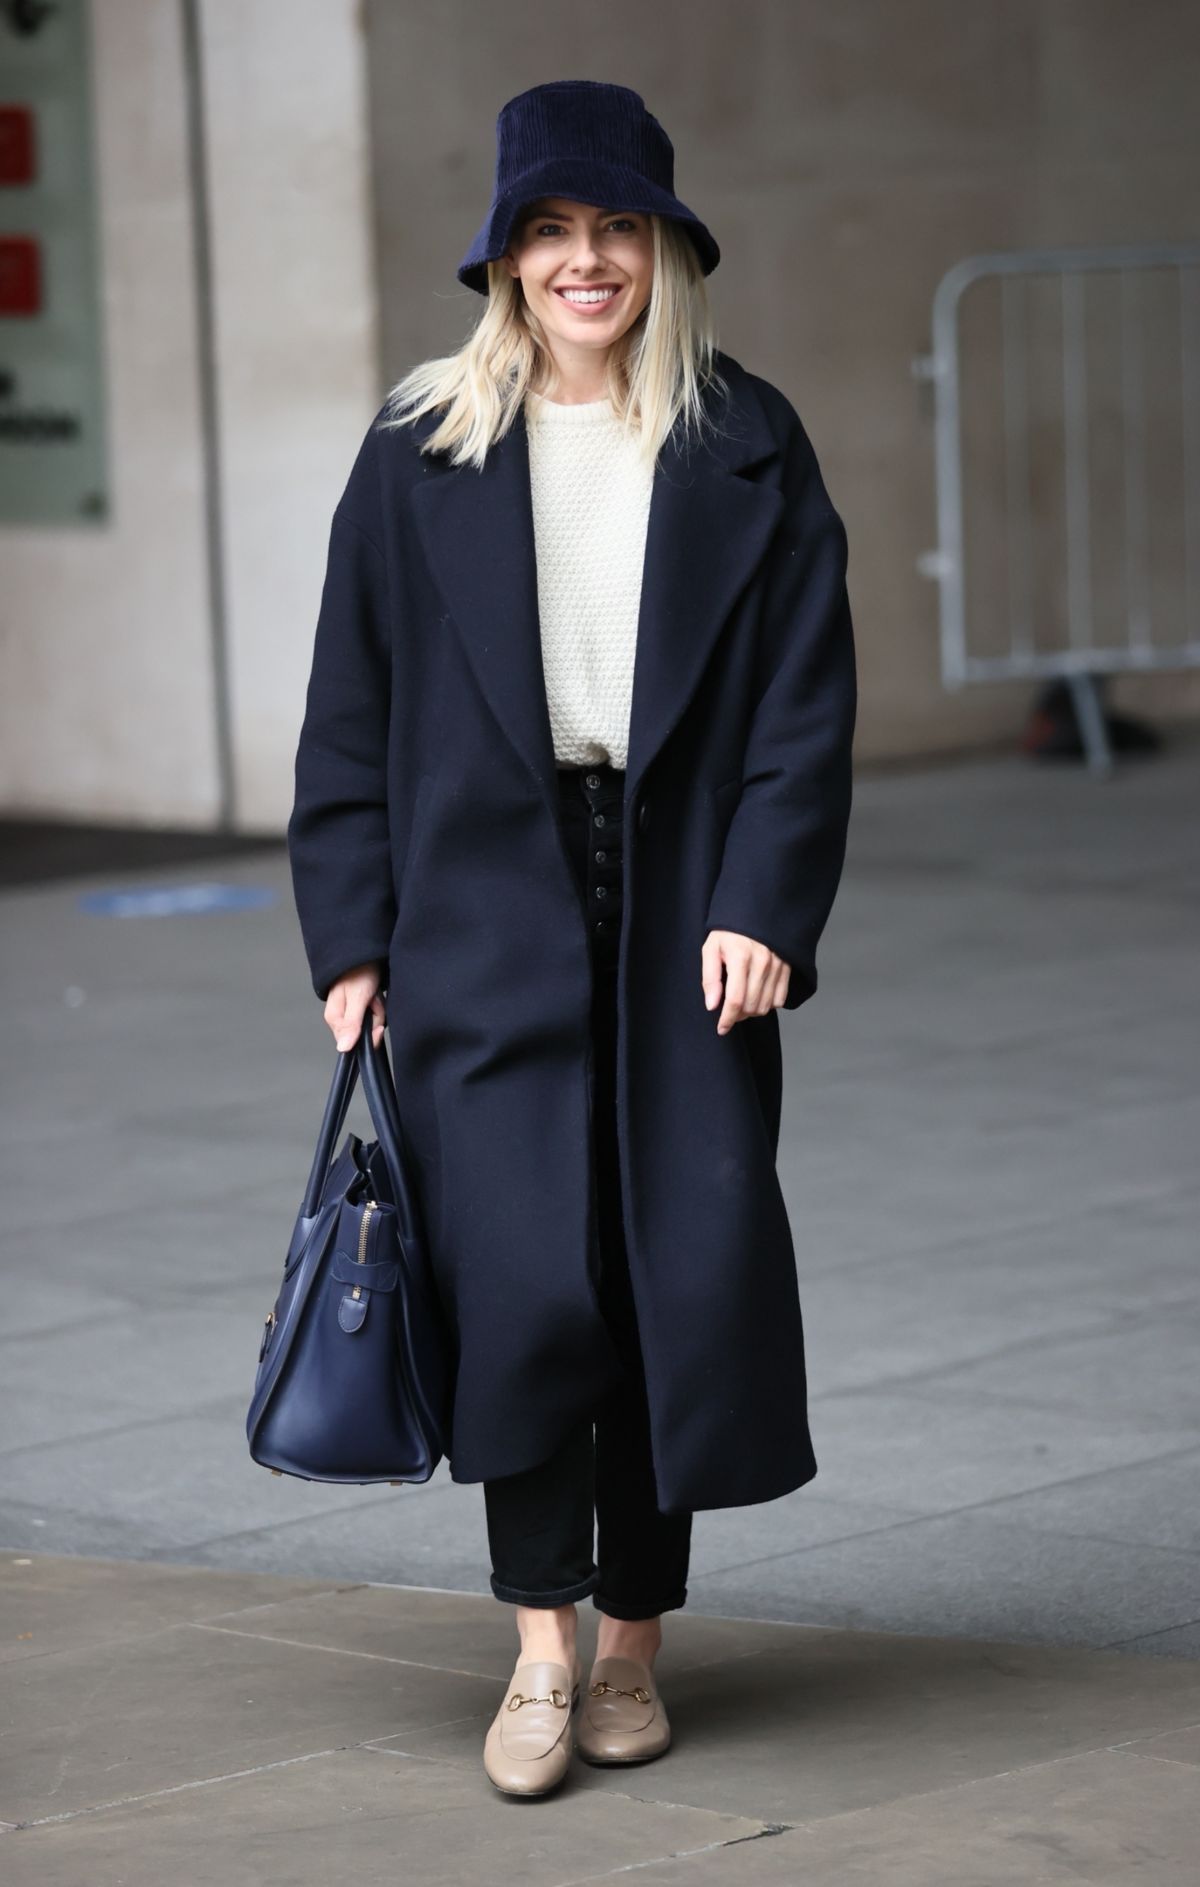 Mollie King Arrives at BBC Studios in London 2020/10/24 6